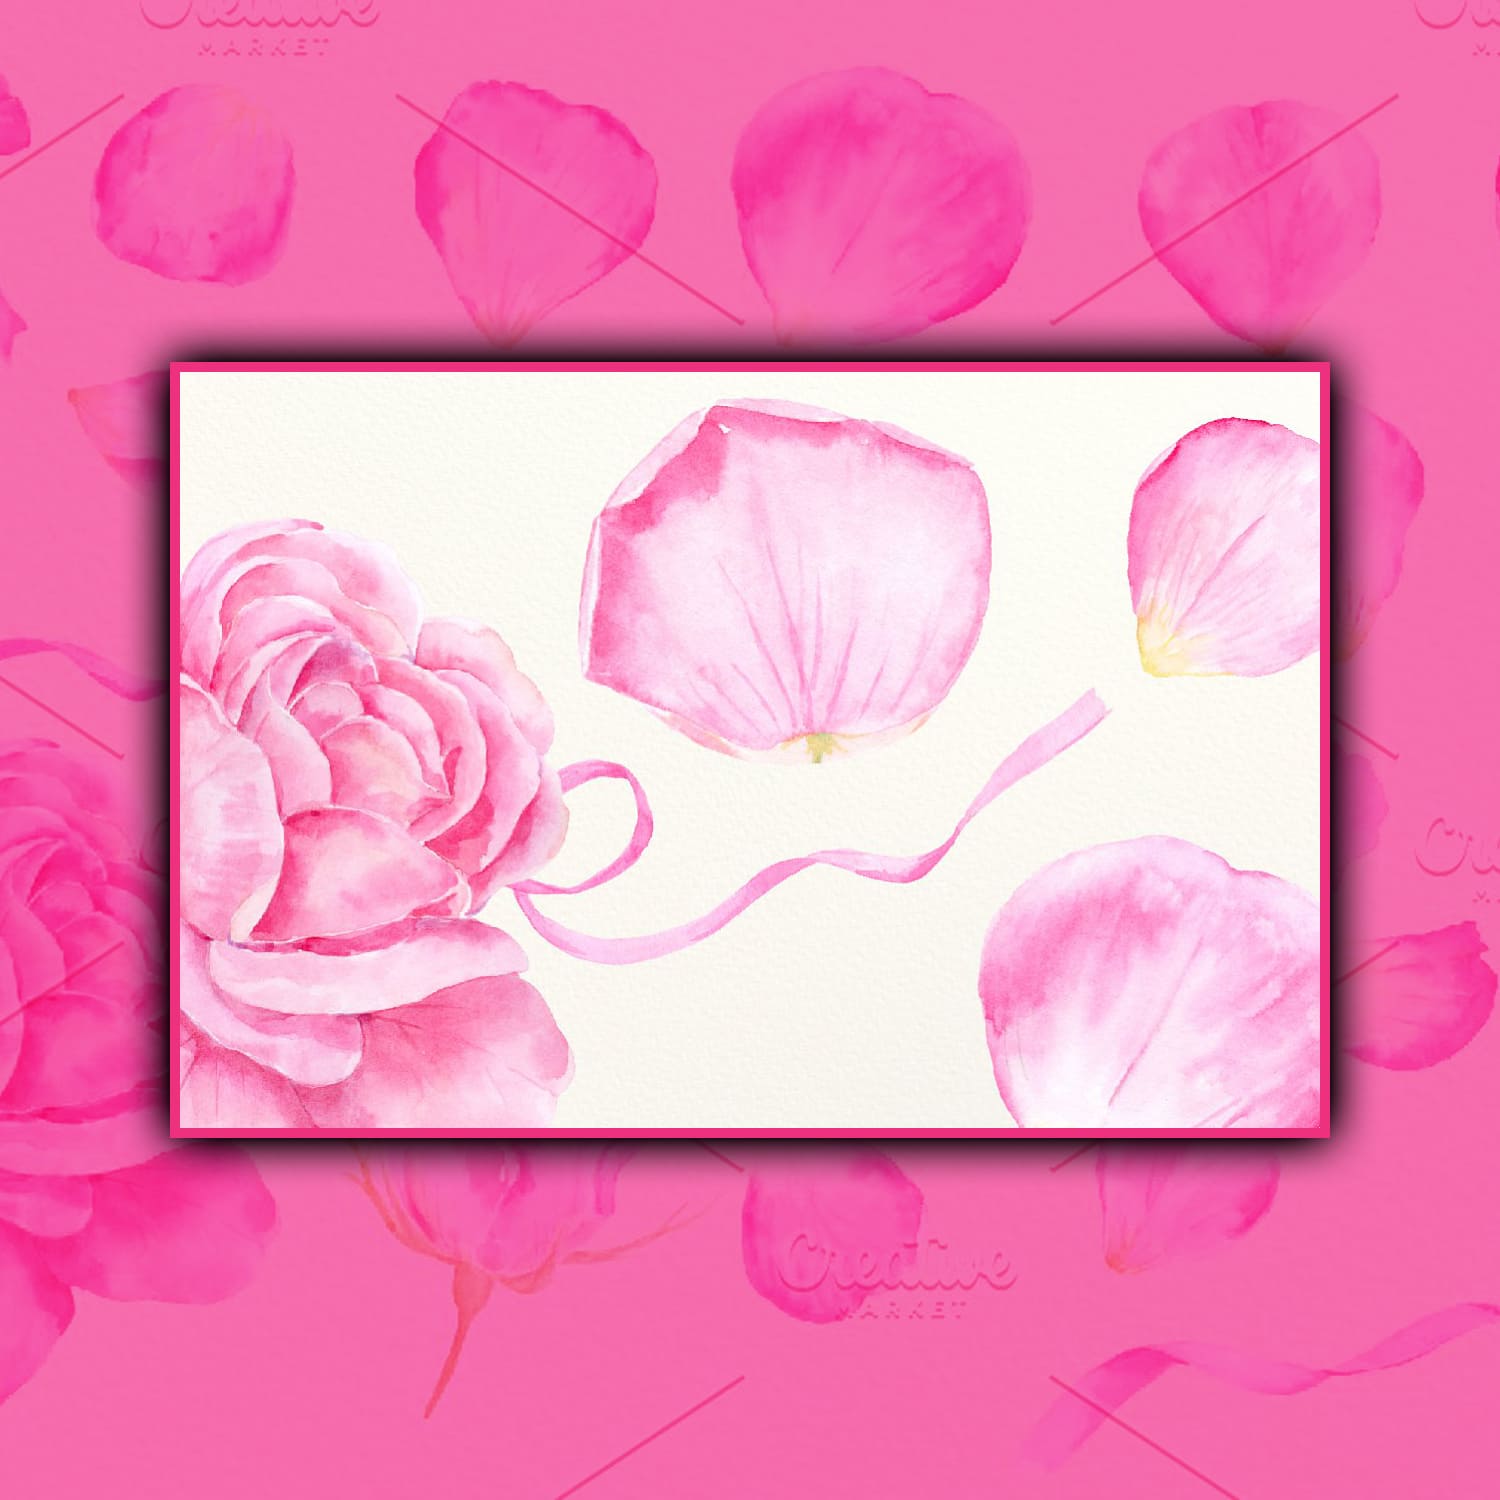 Three pink petals with small details are made in watercolor.